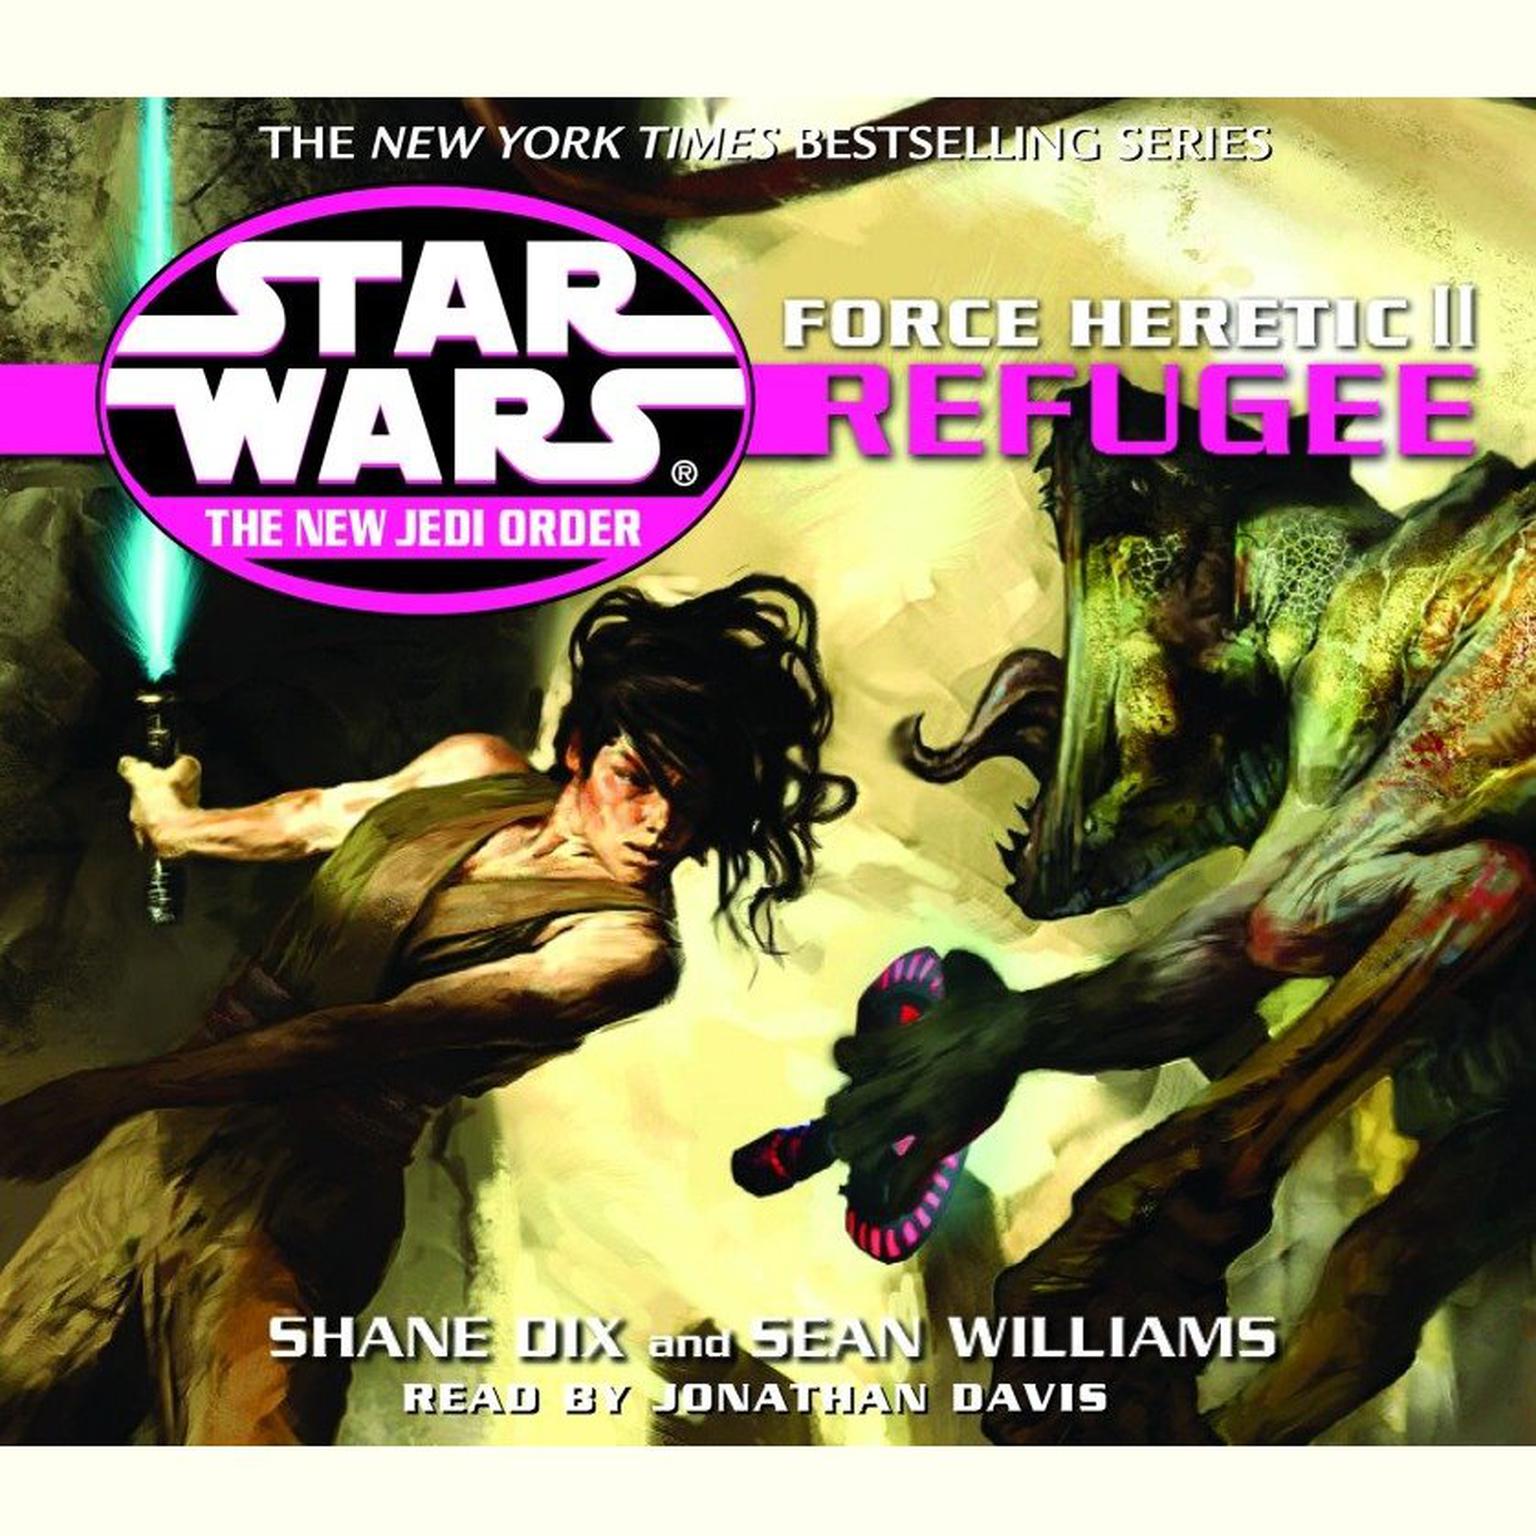 Star Wars: The New Jedi Order: Force Heretic II: Refugee (Abridged) Audiobook, by Sean Williams